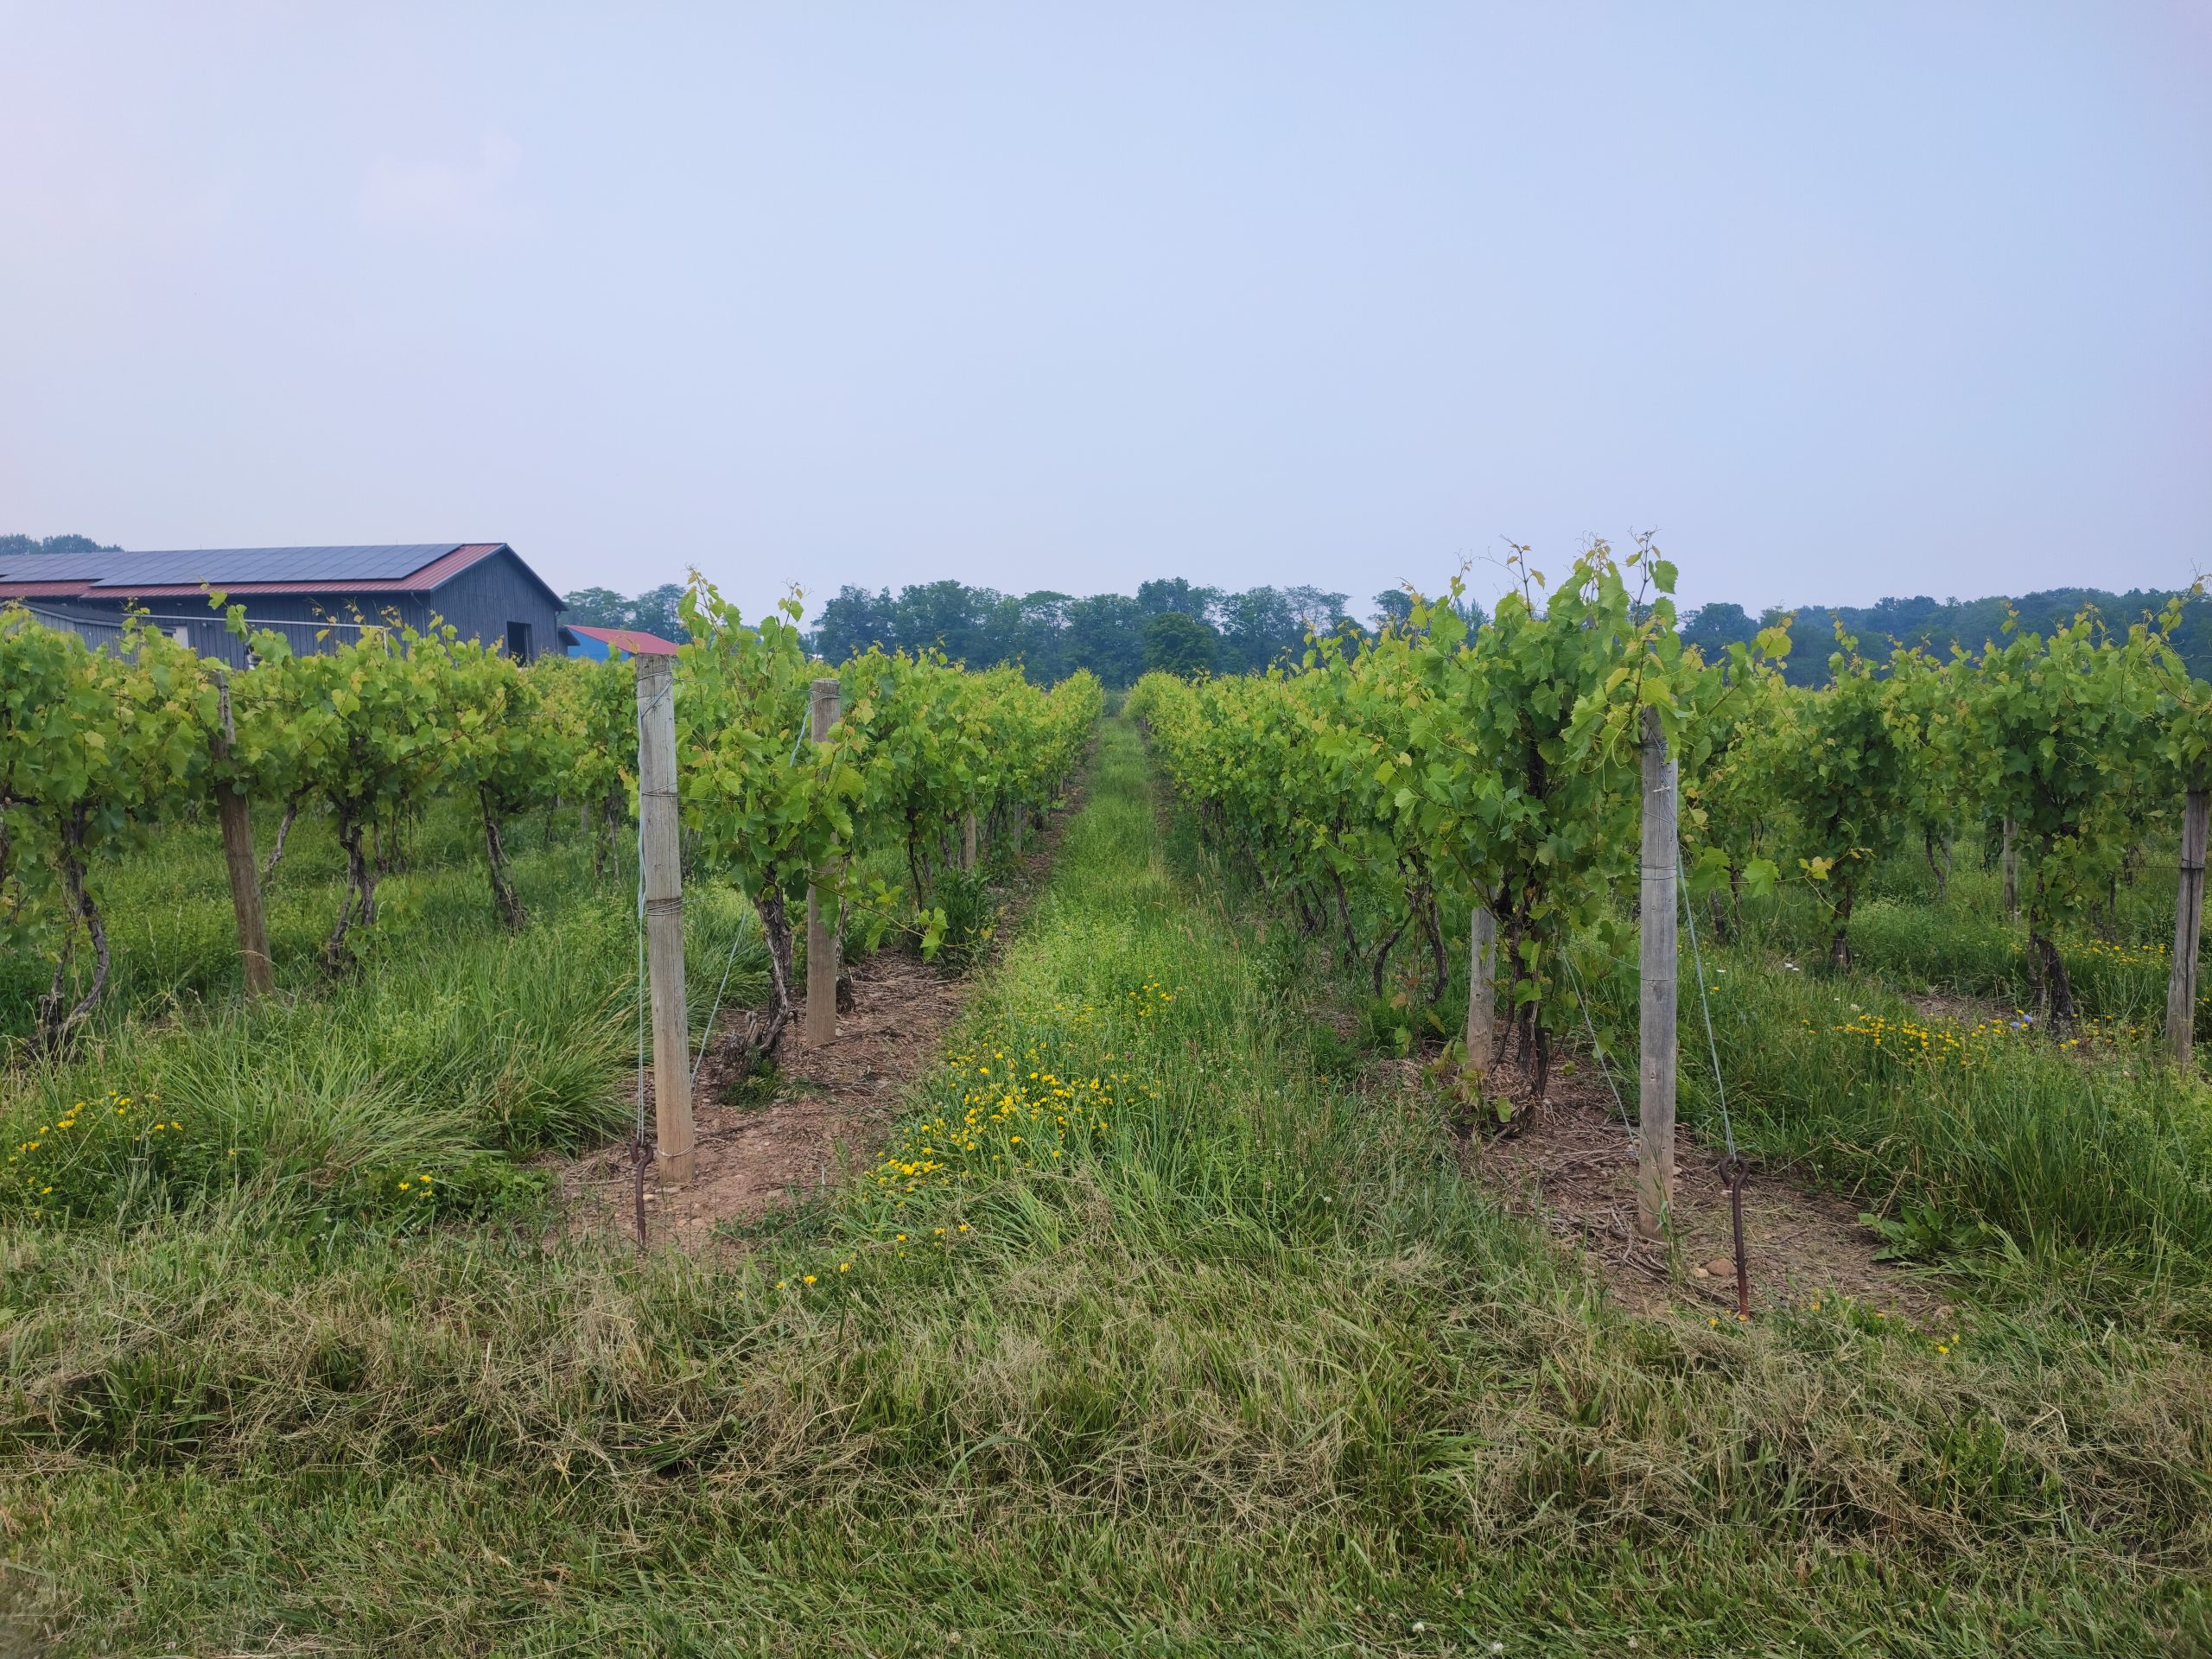 3 vineyards to visit in the Finger Lakes